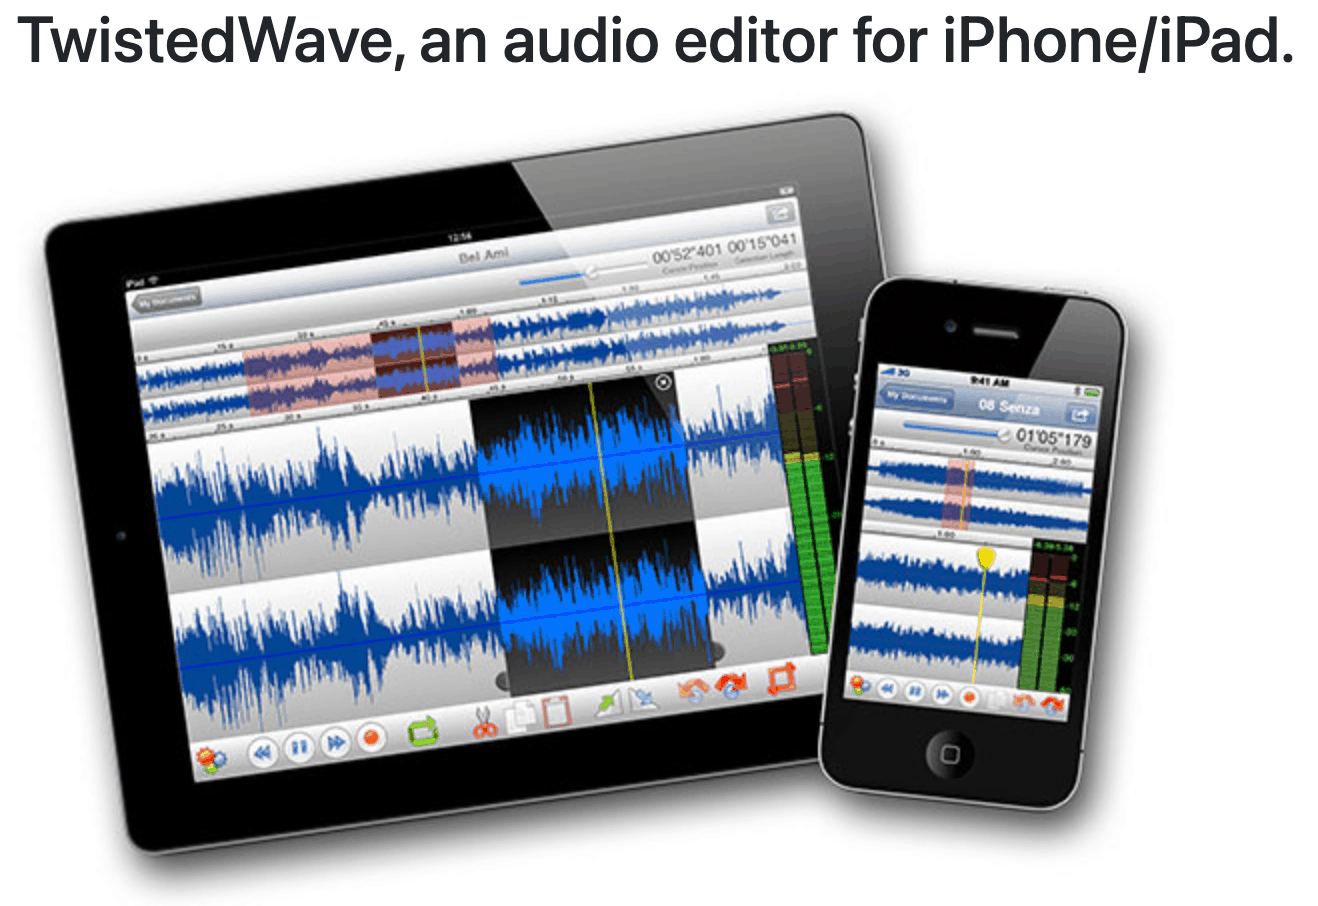 Best audio editing software - Twister Wave